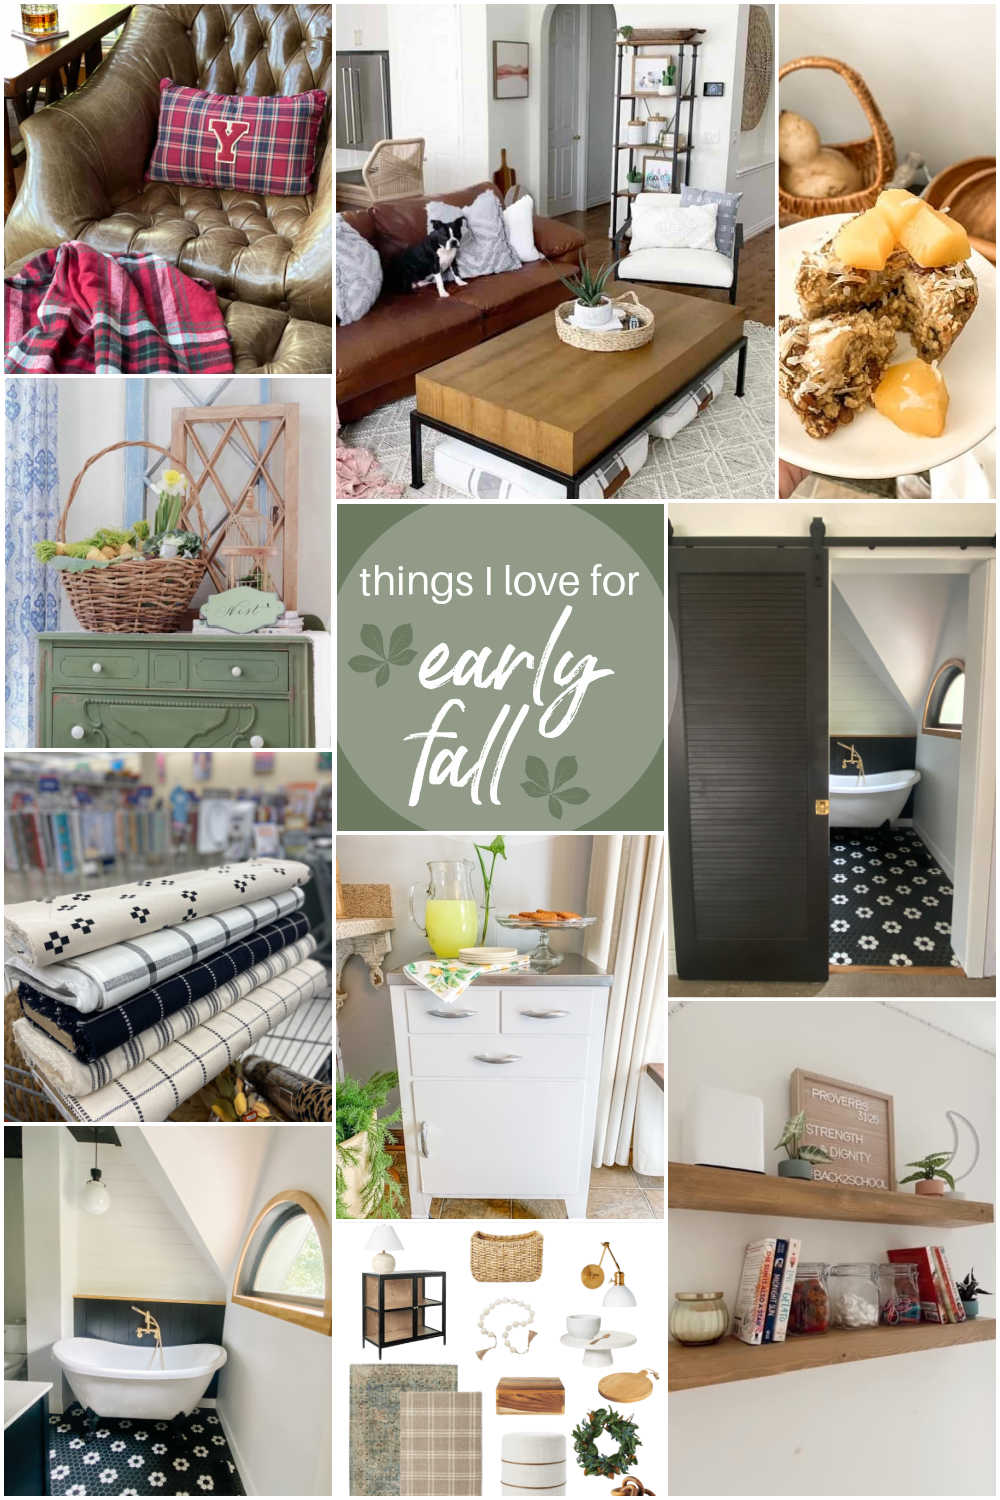 Welcome Home Saturday - Things I Love For Early Fall! DIY projects, bathroom remodel update and things I love this week!